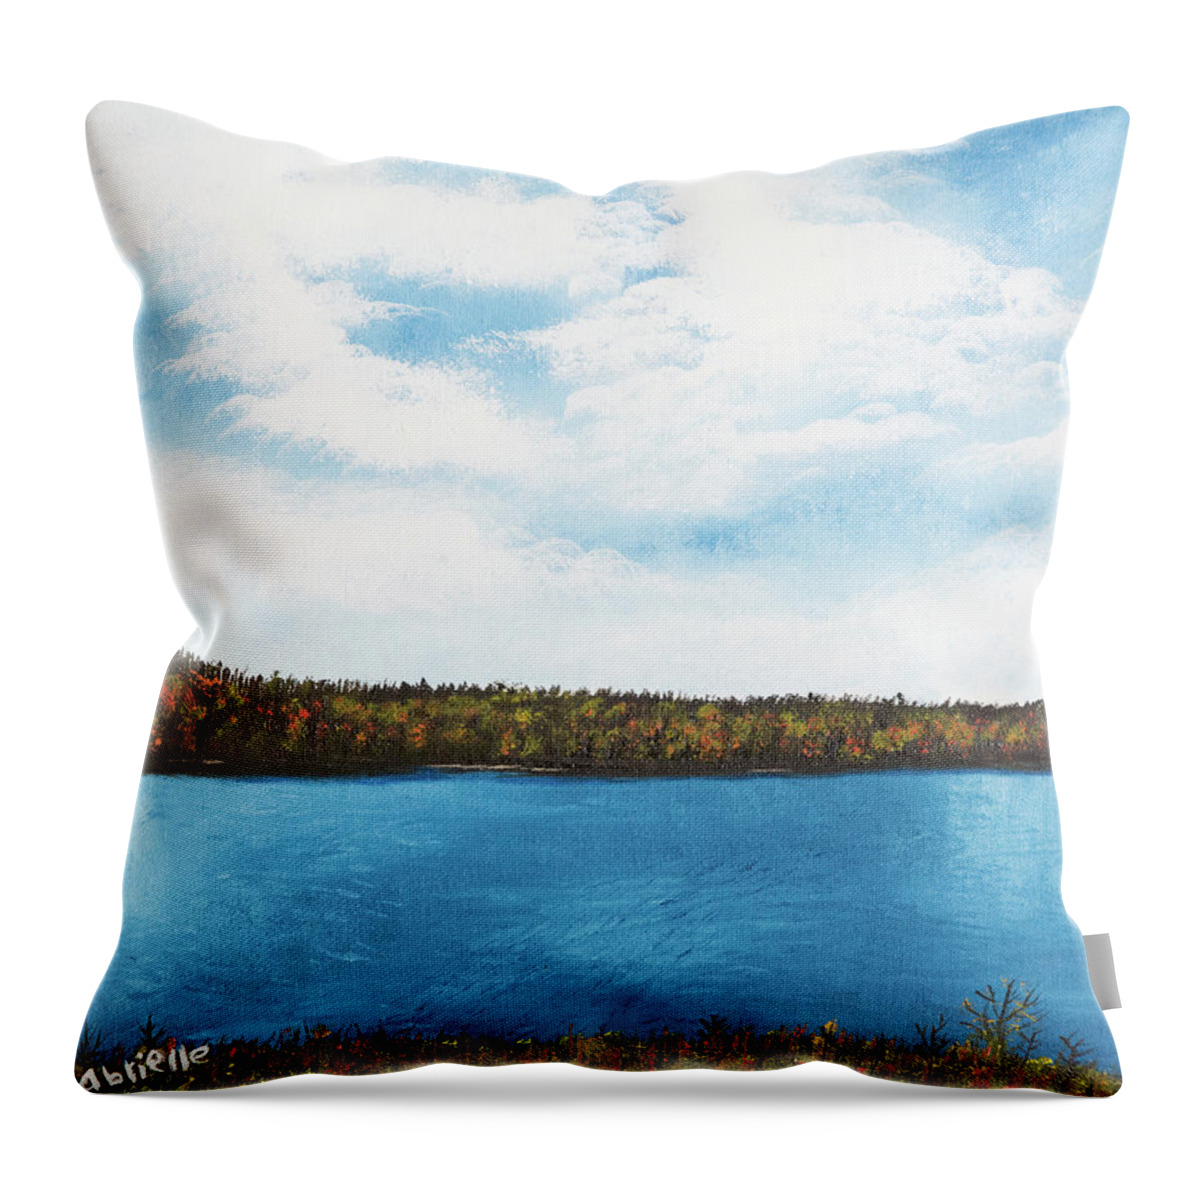 Landscape Throw Pillow featuring the painting Fall In Itasca by Gabrielle Munoz